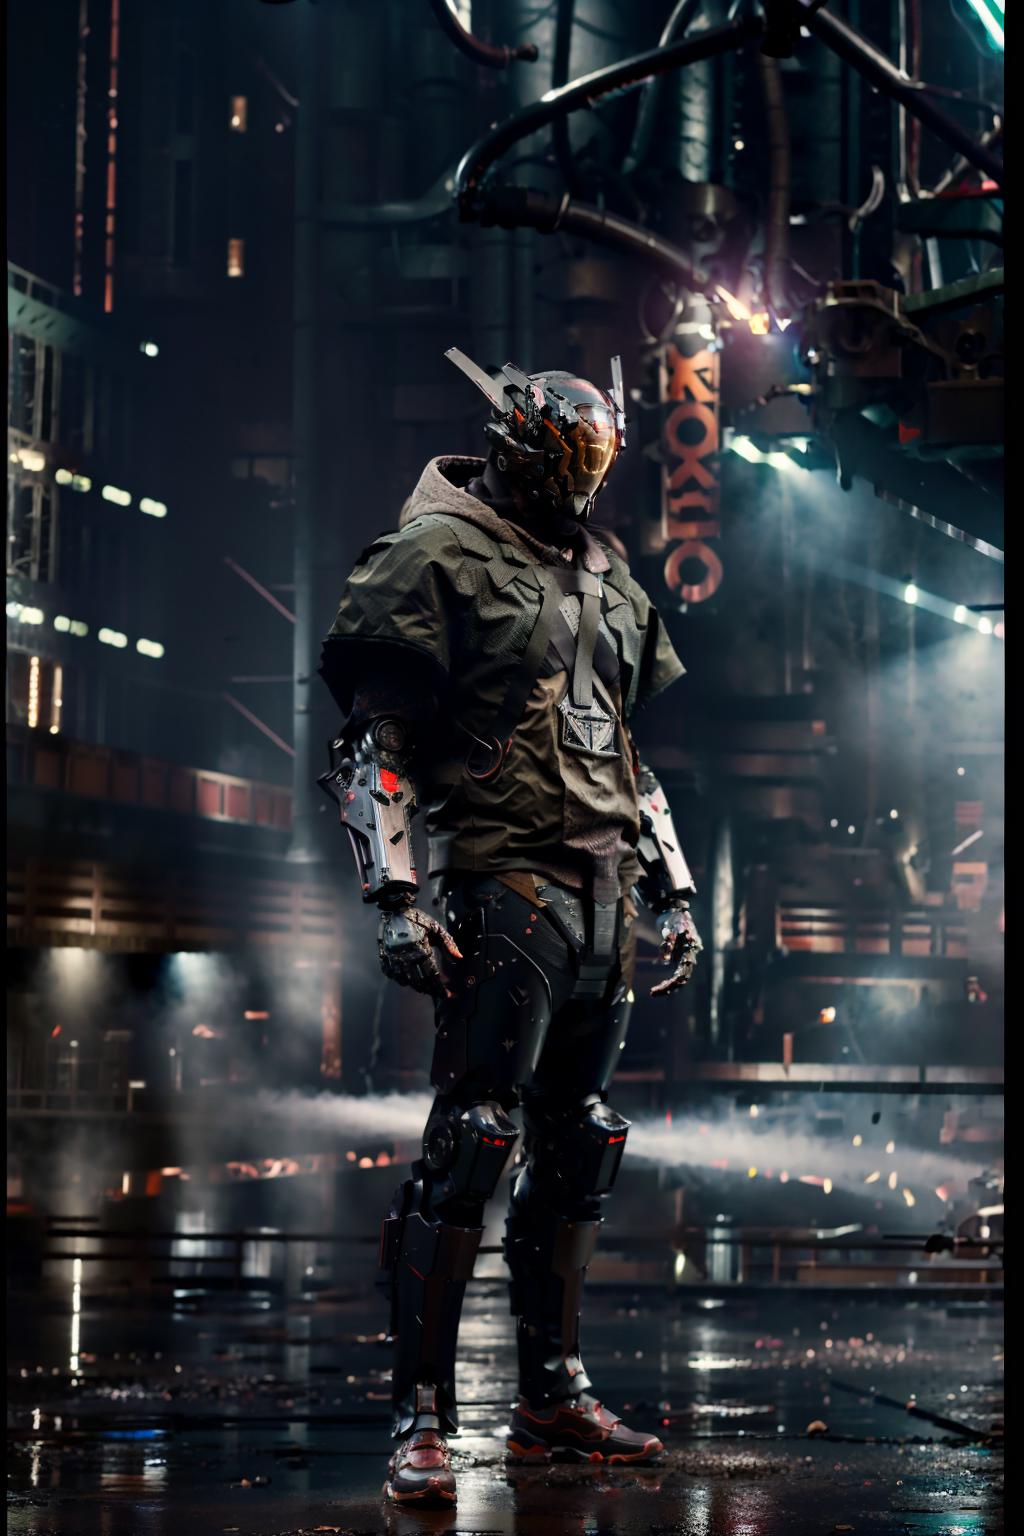 A person standing in a futuristic city with a green jacket and metal armor.